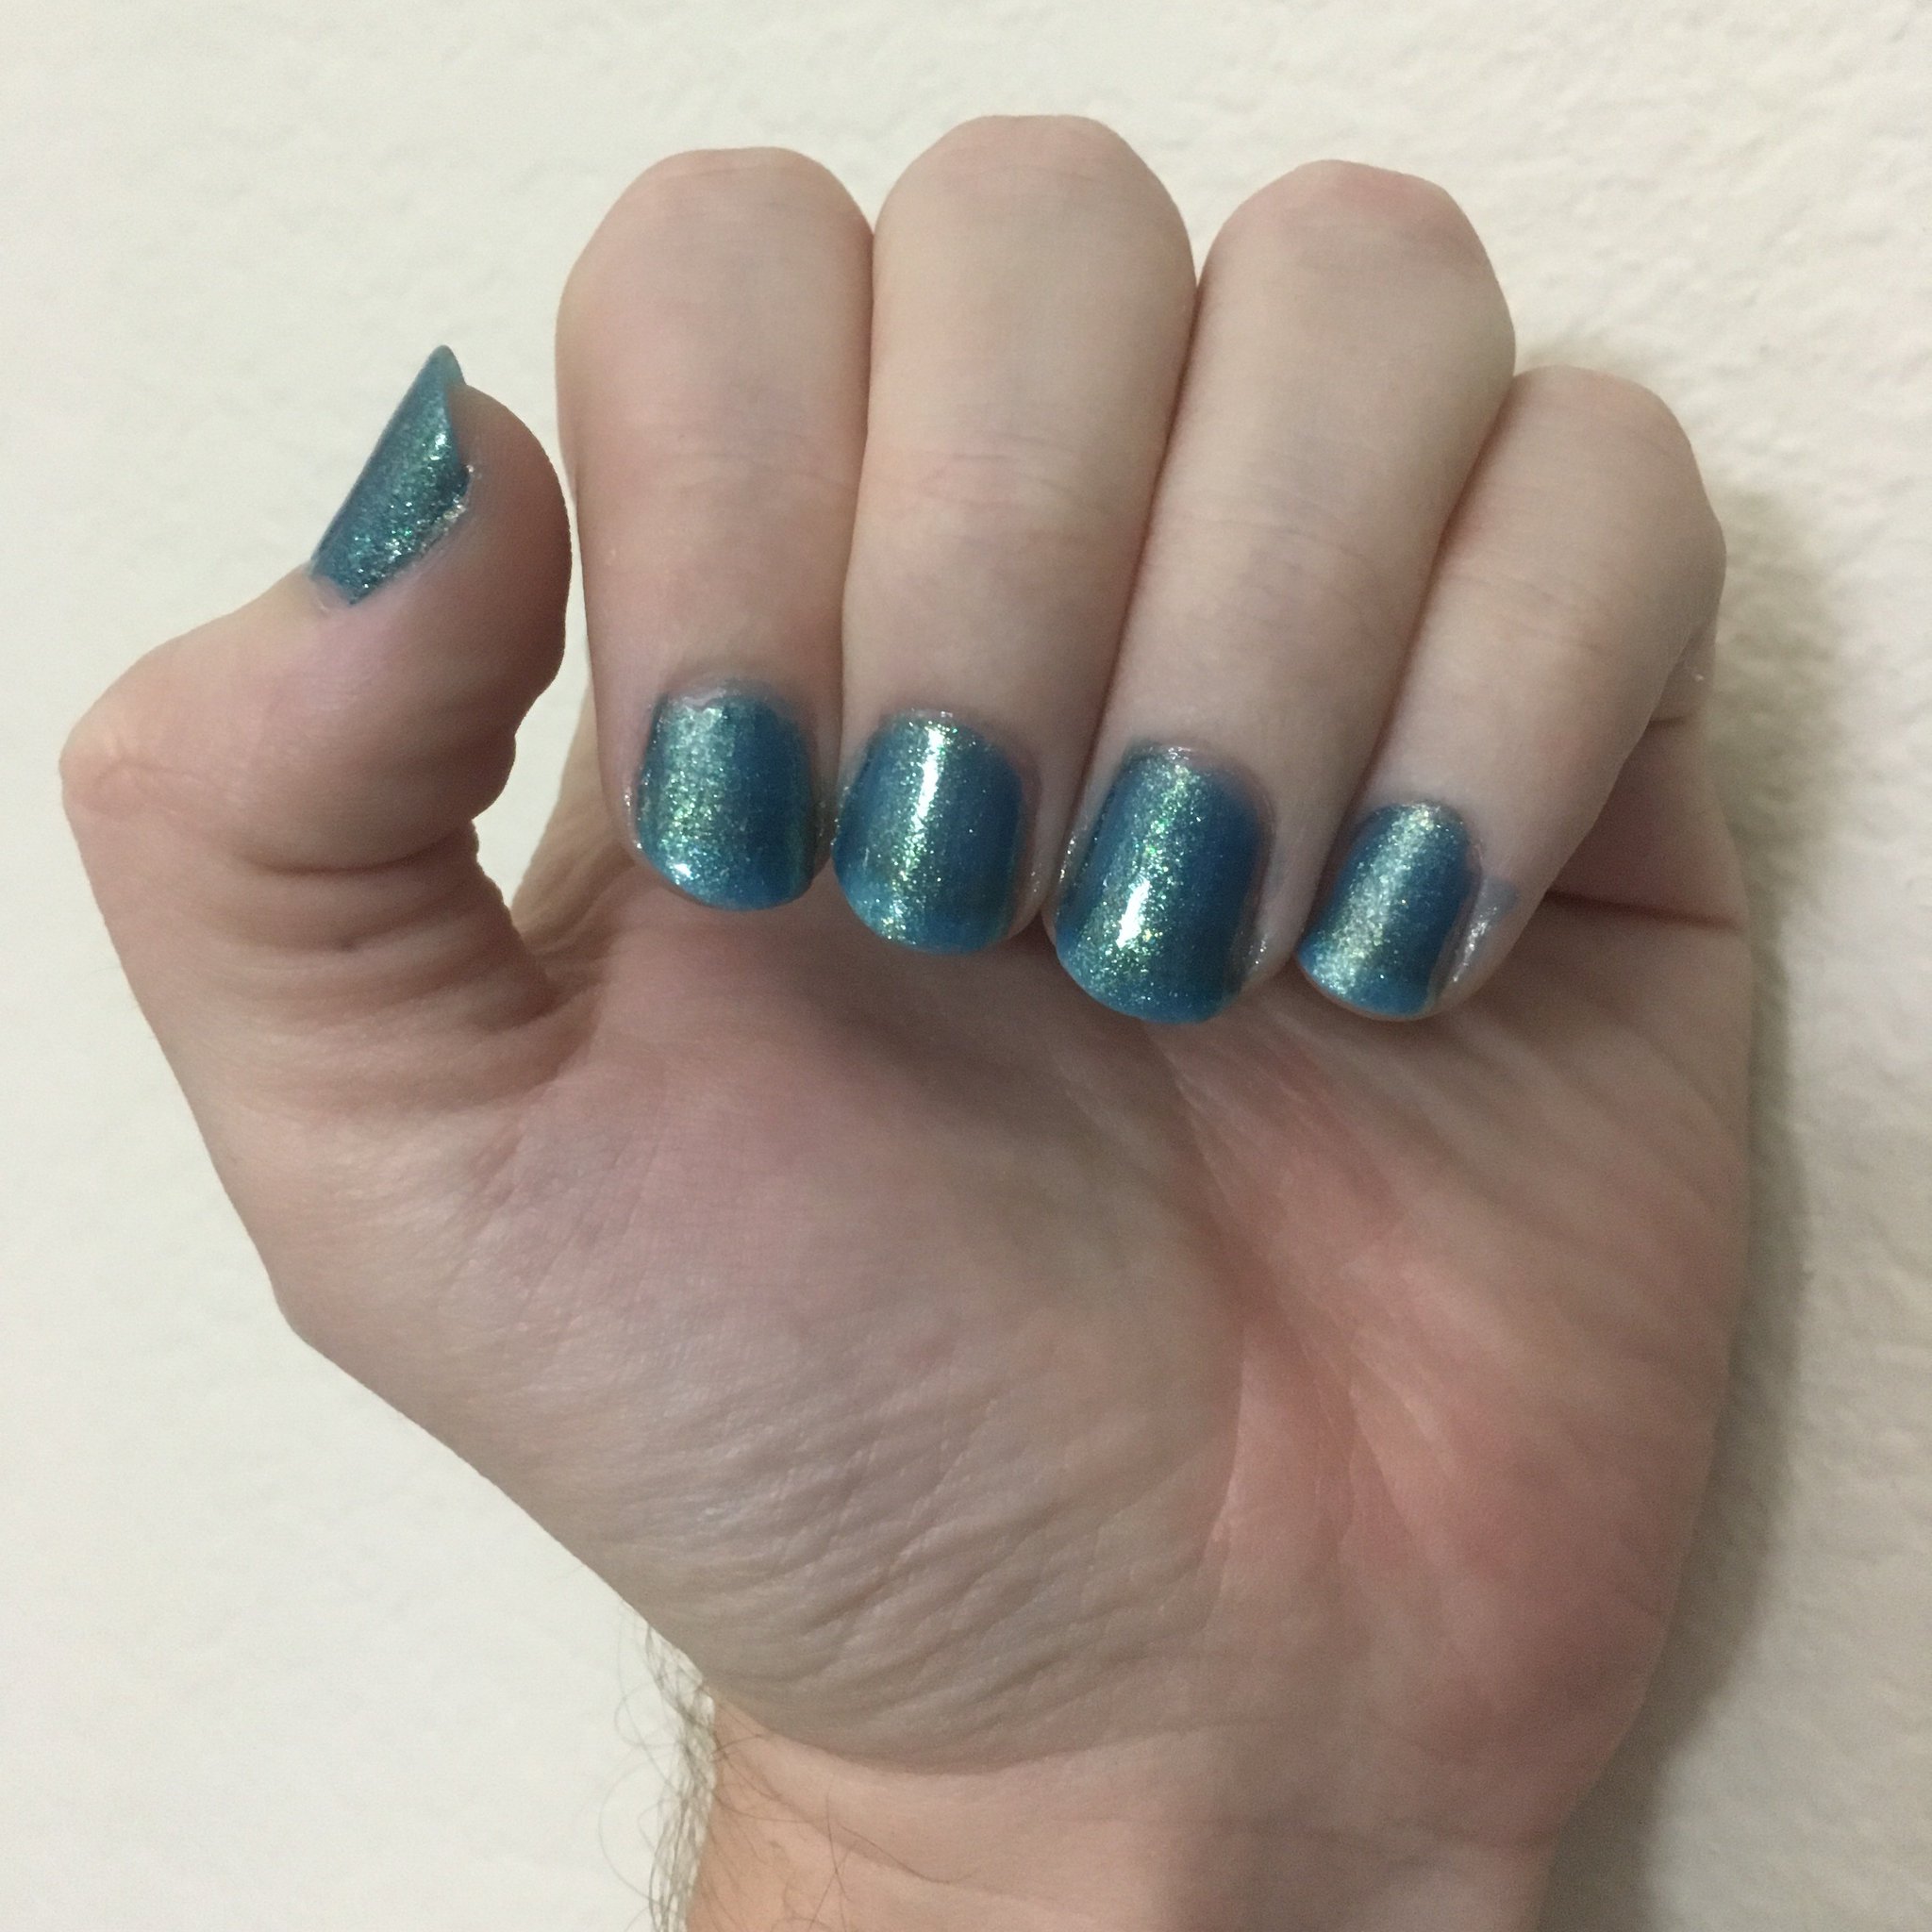 L.A. Colors “Mermaid”, a teal color with a fine glittery texture.